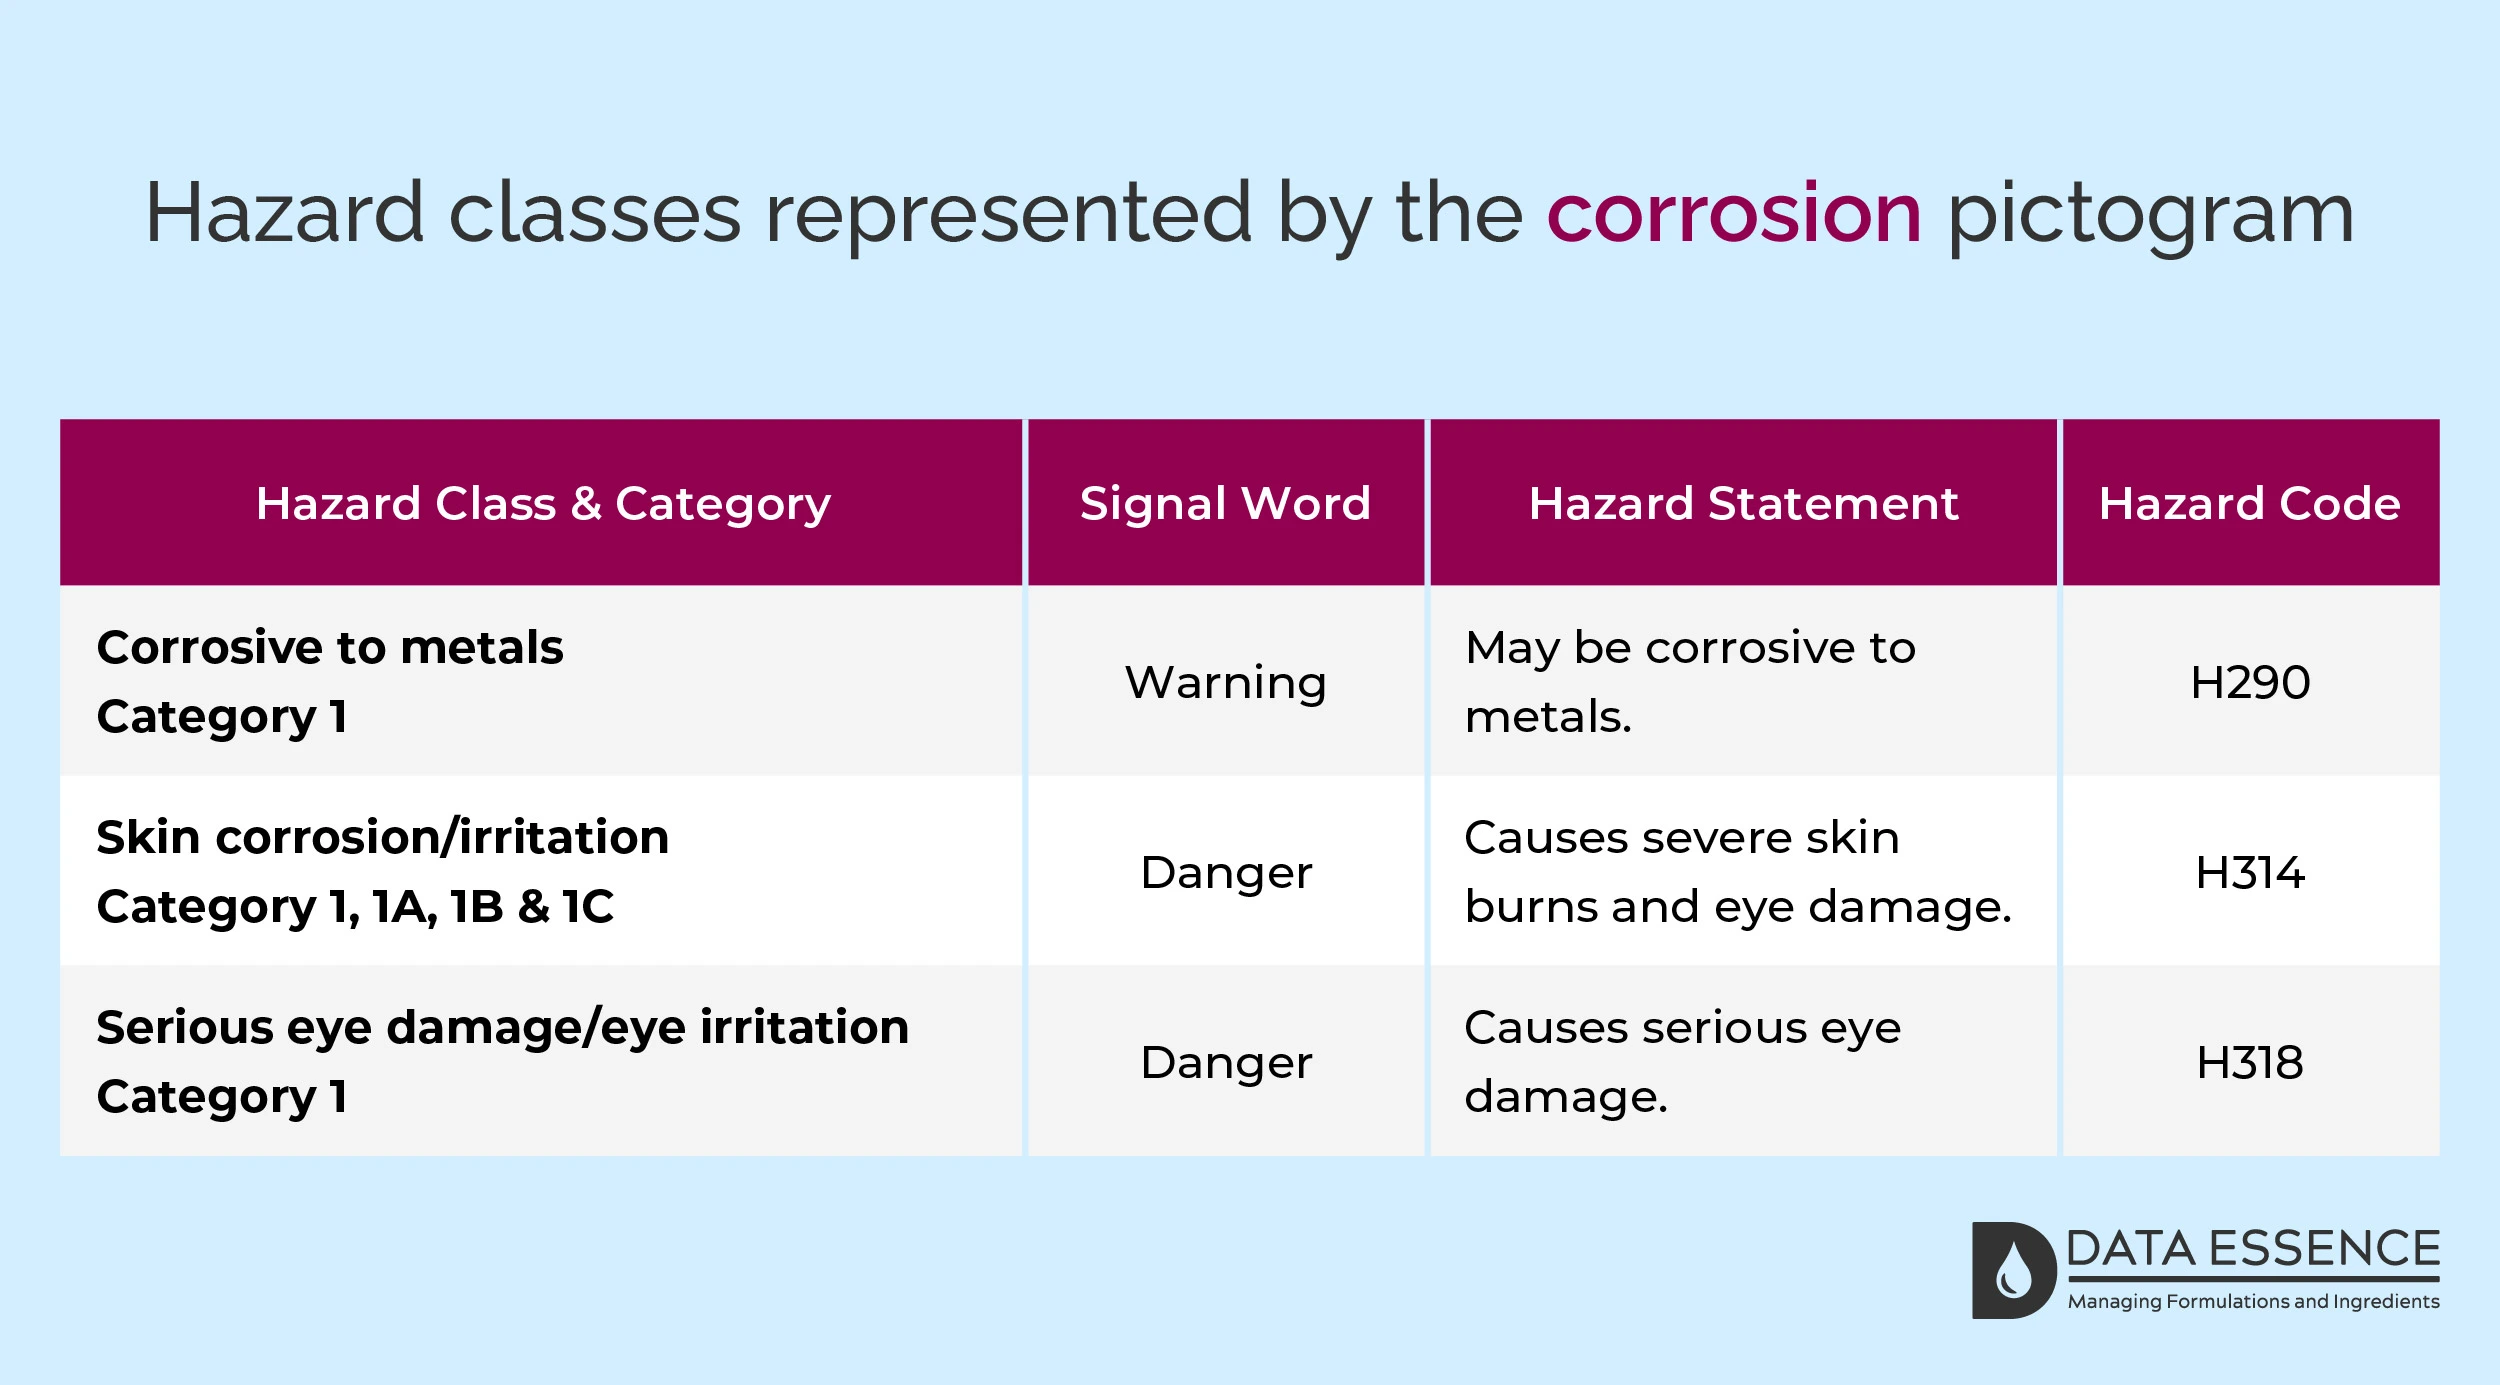 Hazard classes represented by the corrosion pictogram